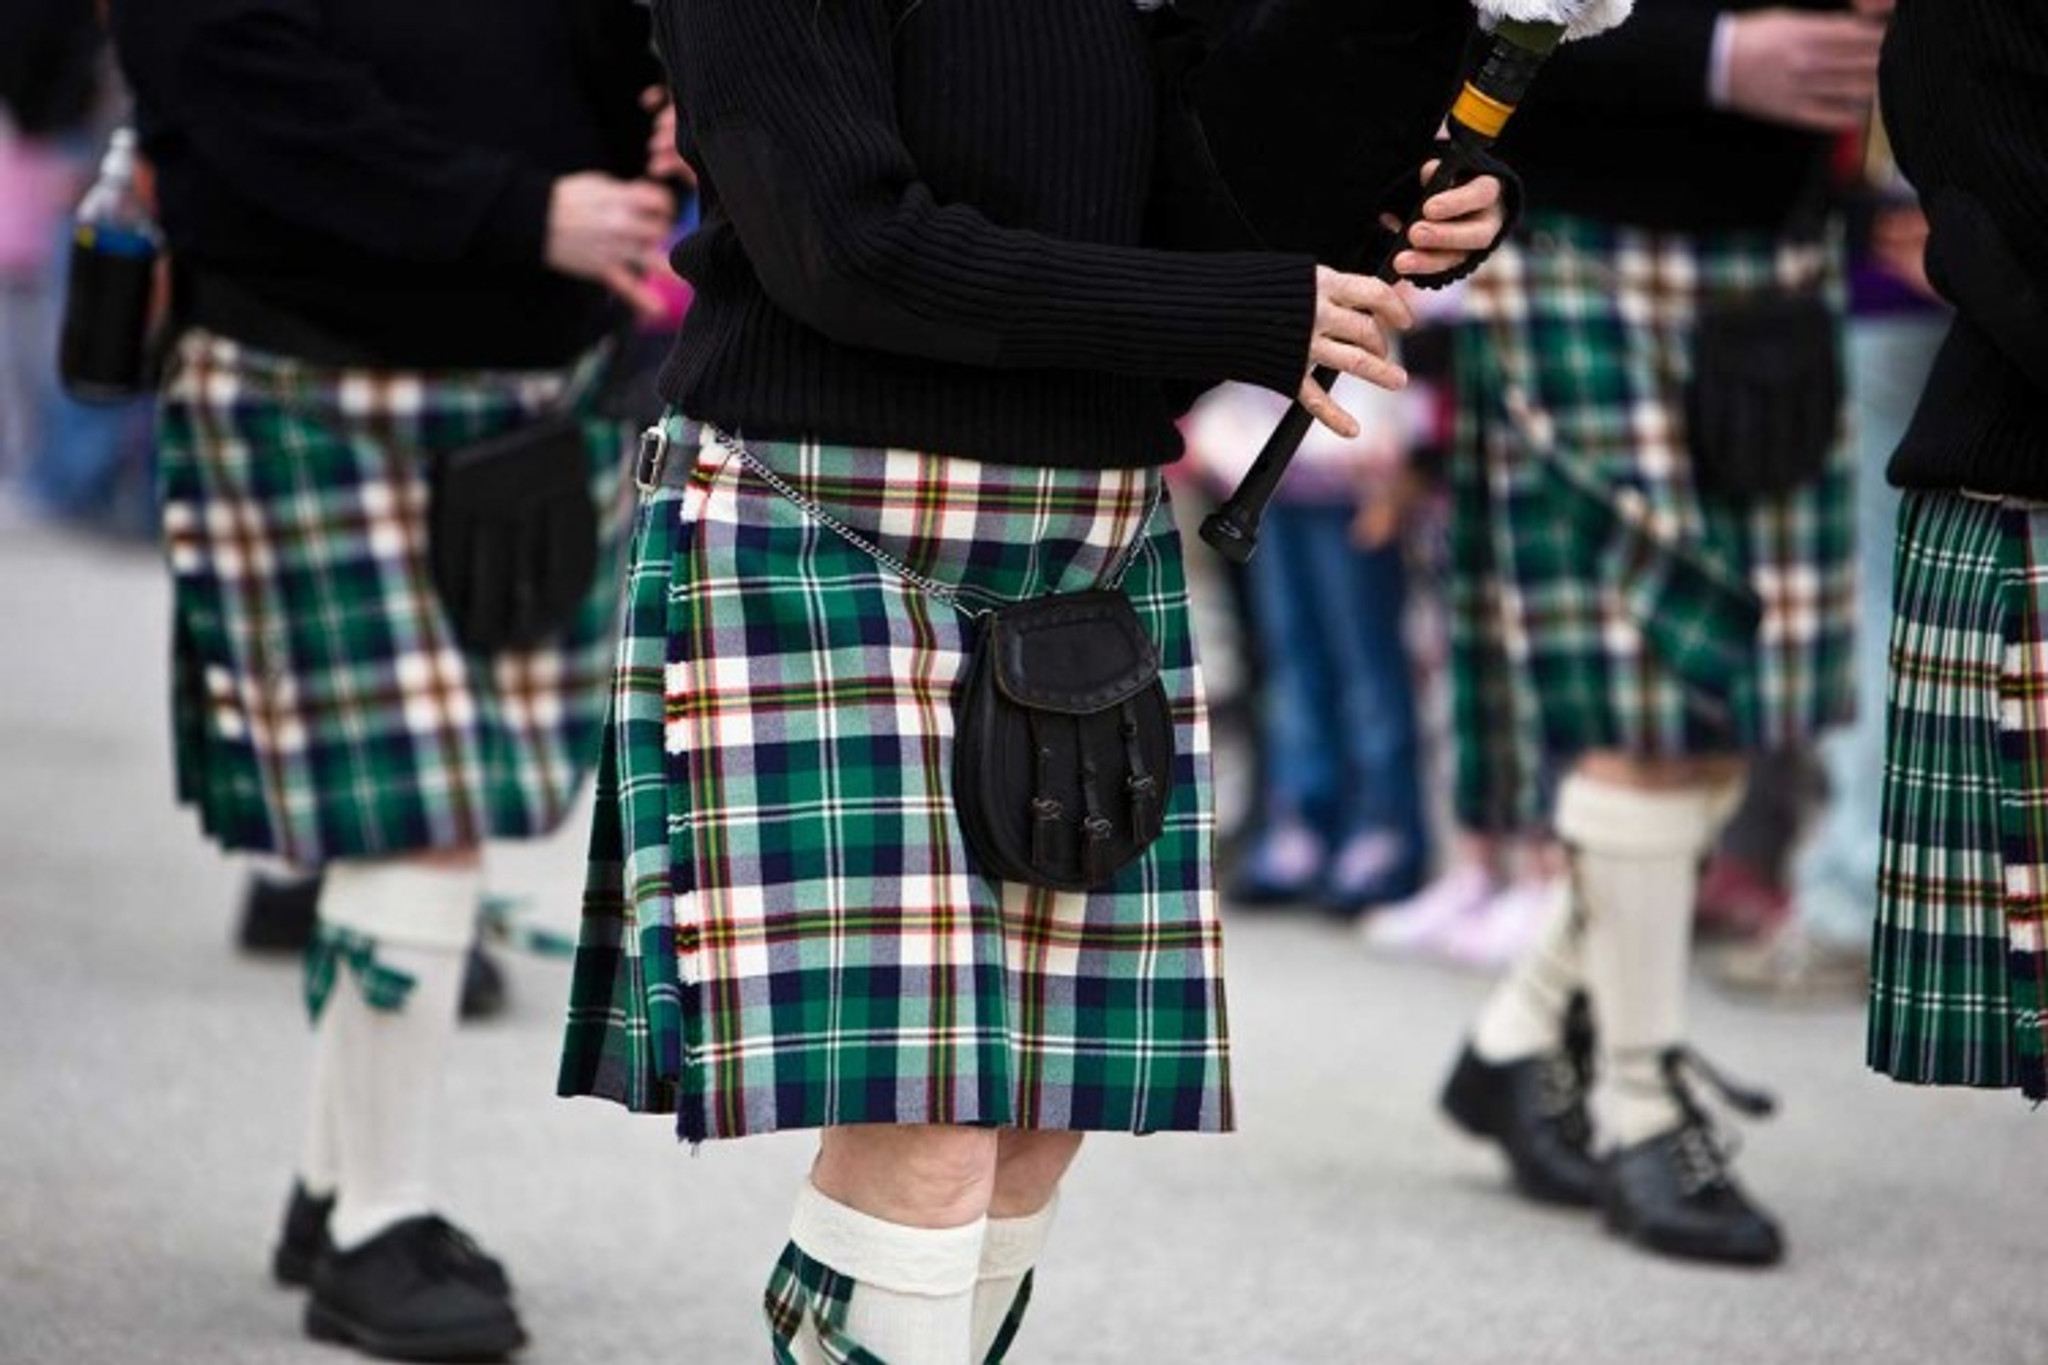 The Biggest St. Patrick's Day Celebrations in the U.S.